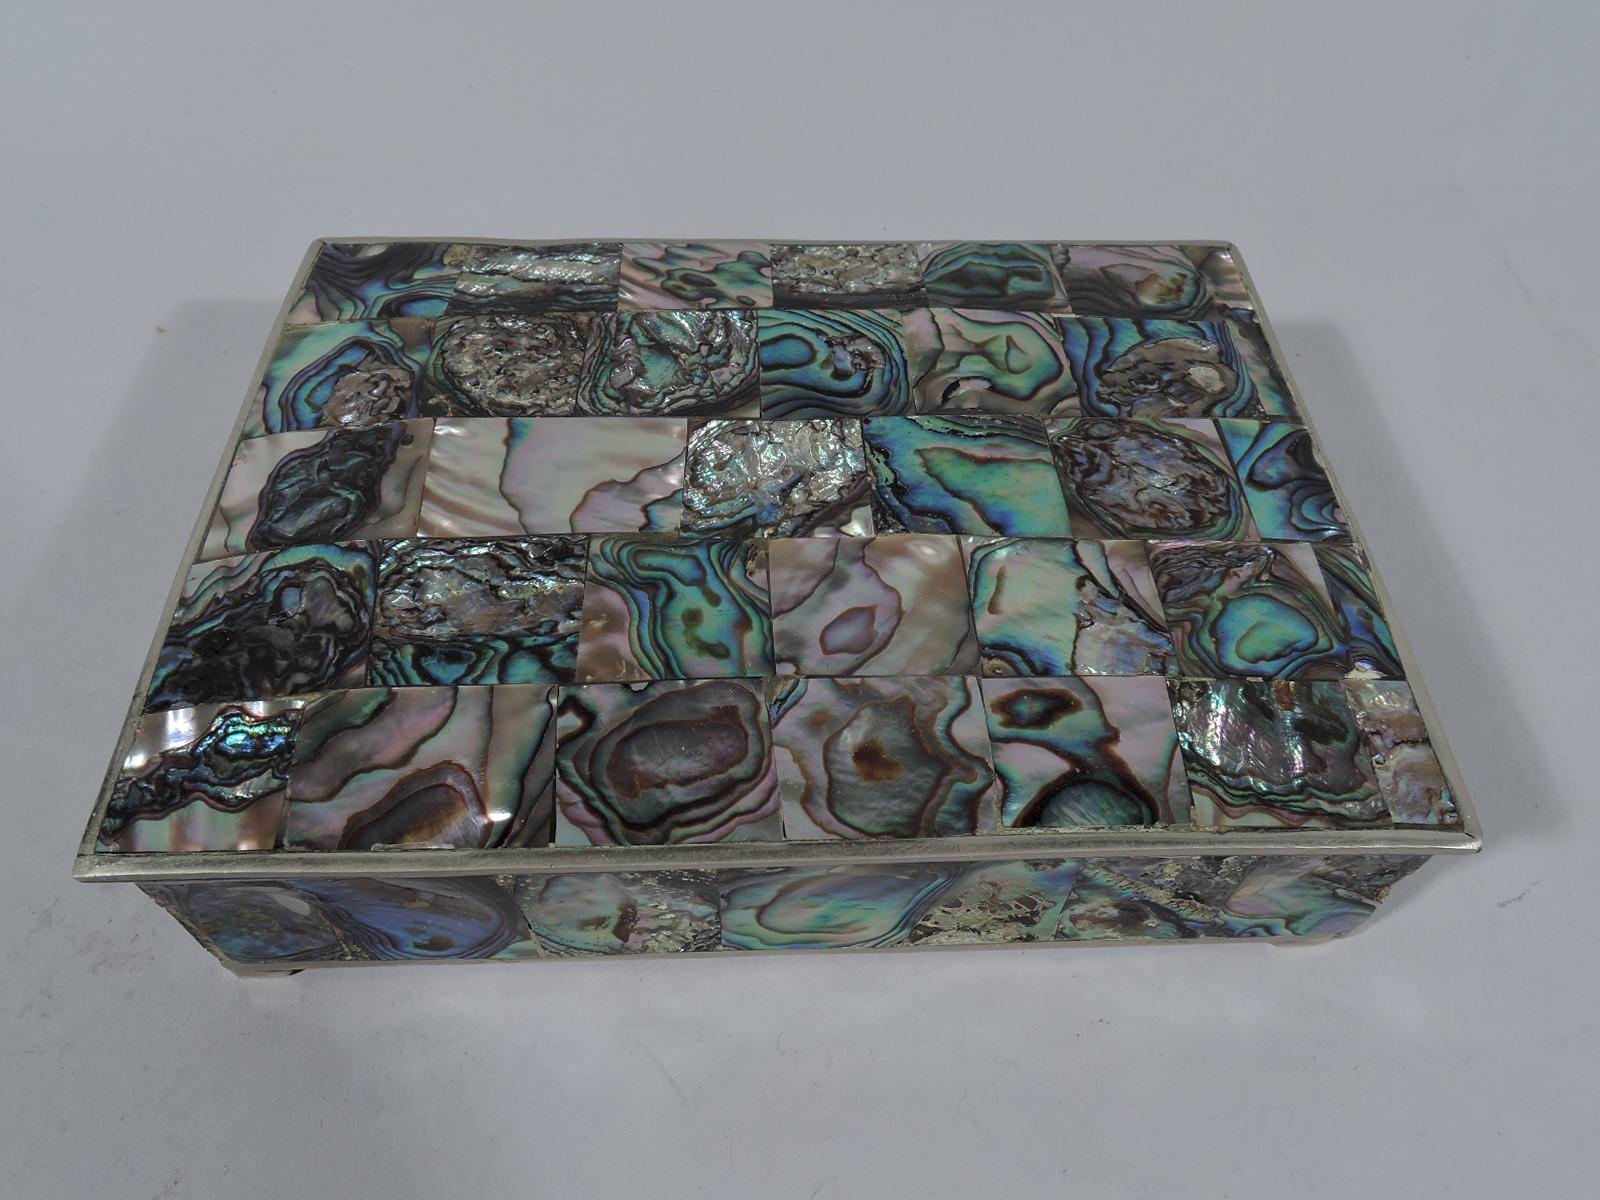 Mexican trinket box, circa 1950. Low and rectangular with corner bracket supports. Cover hinged and gently curved with overhang. Luminous and irregular abalone veneer in form of square tesserae applied to sides and cover top. Box interior lined with